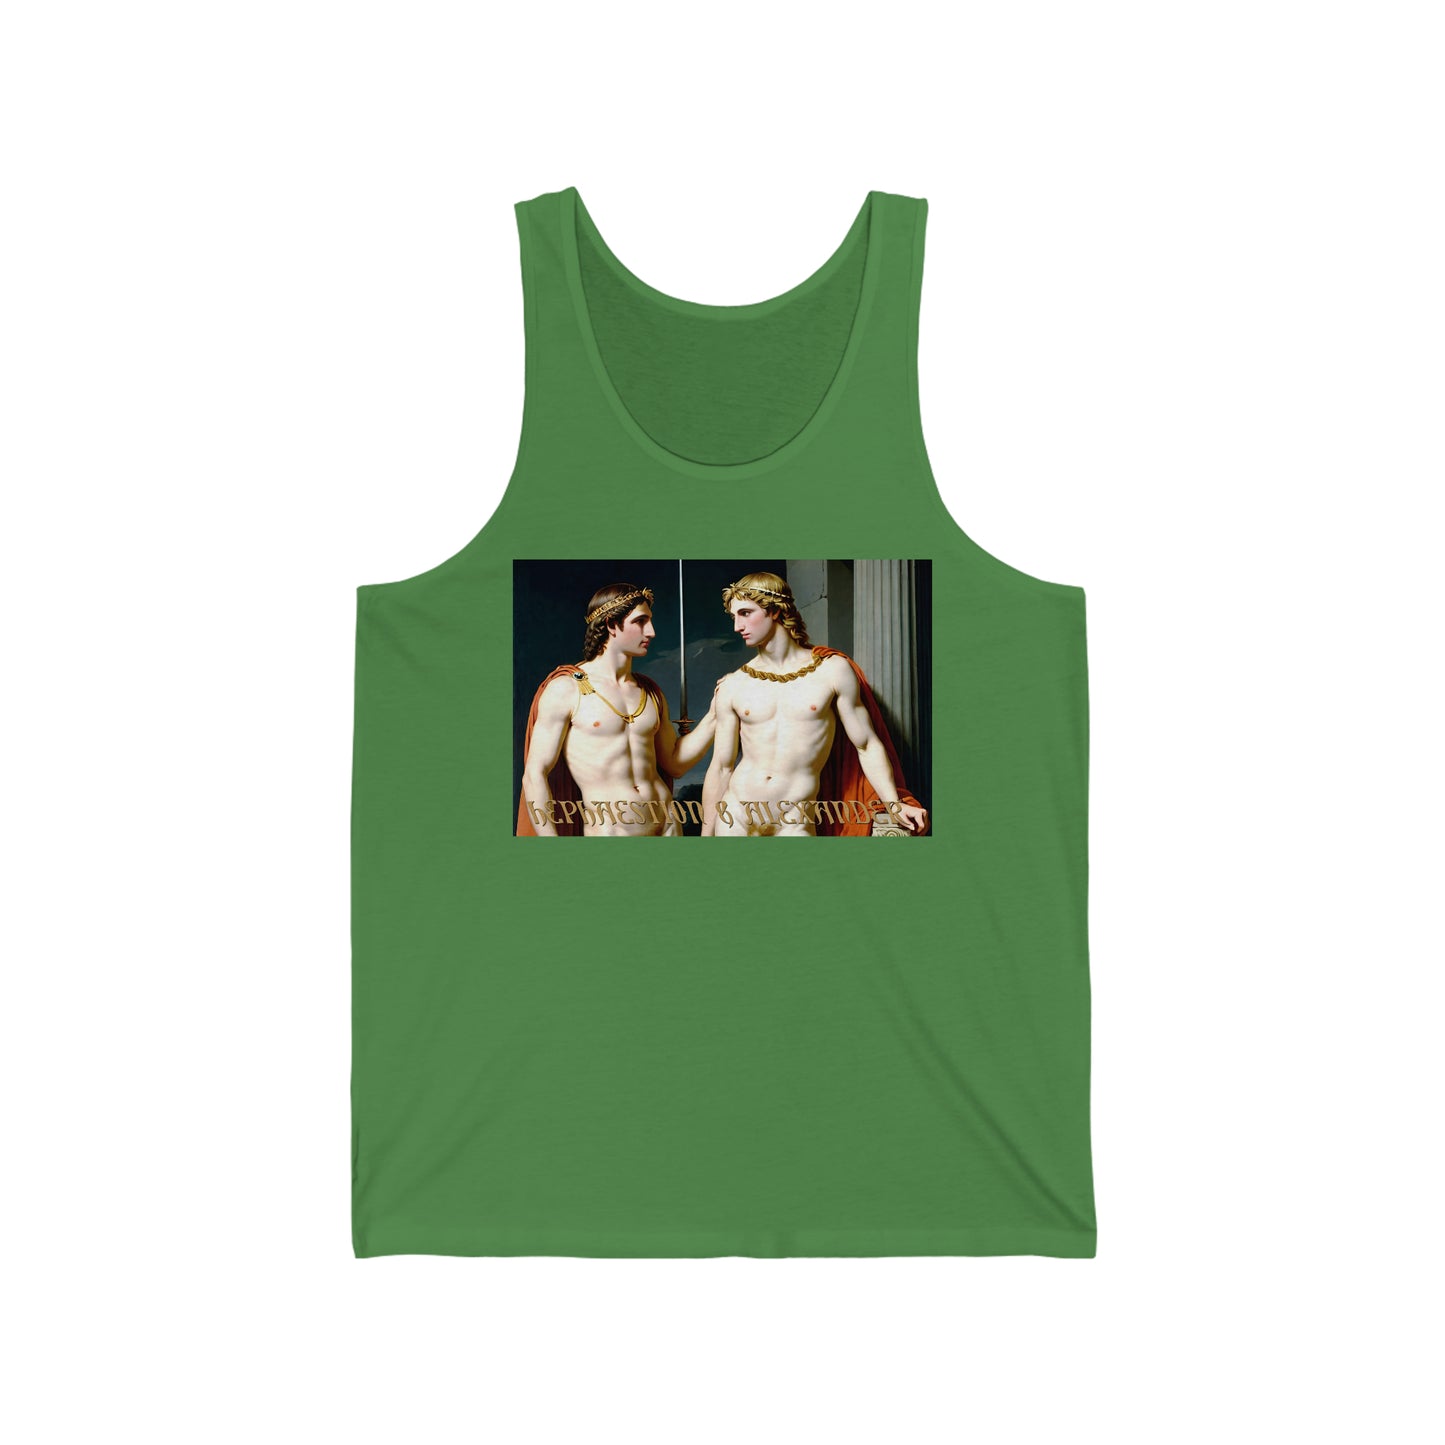 Classical Hephaestion and Alexander the Great Tank Top